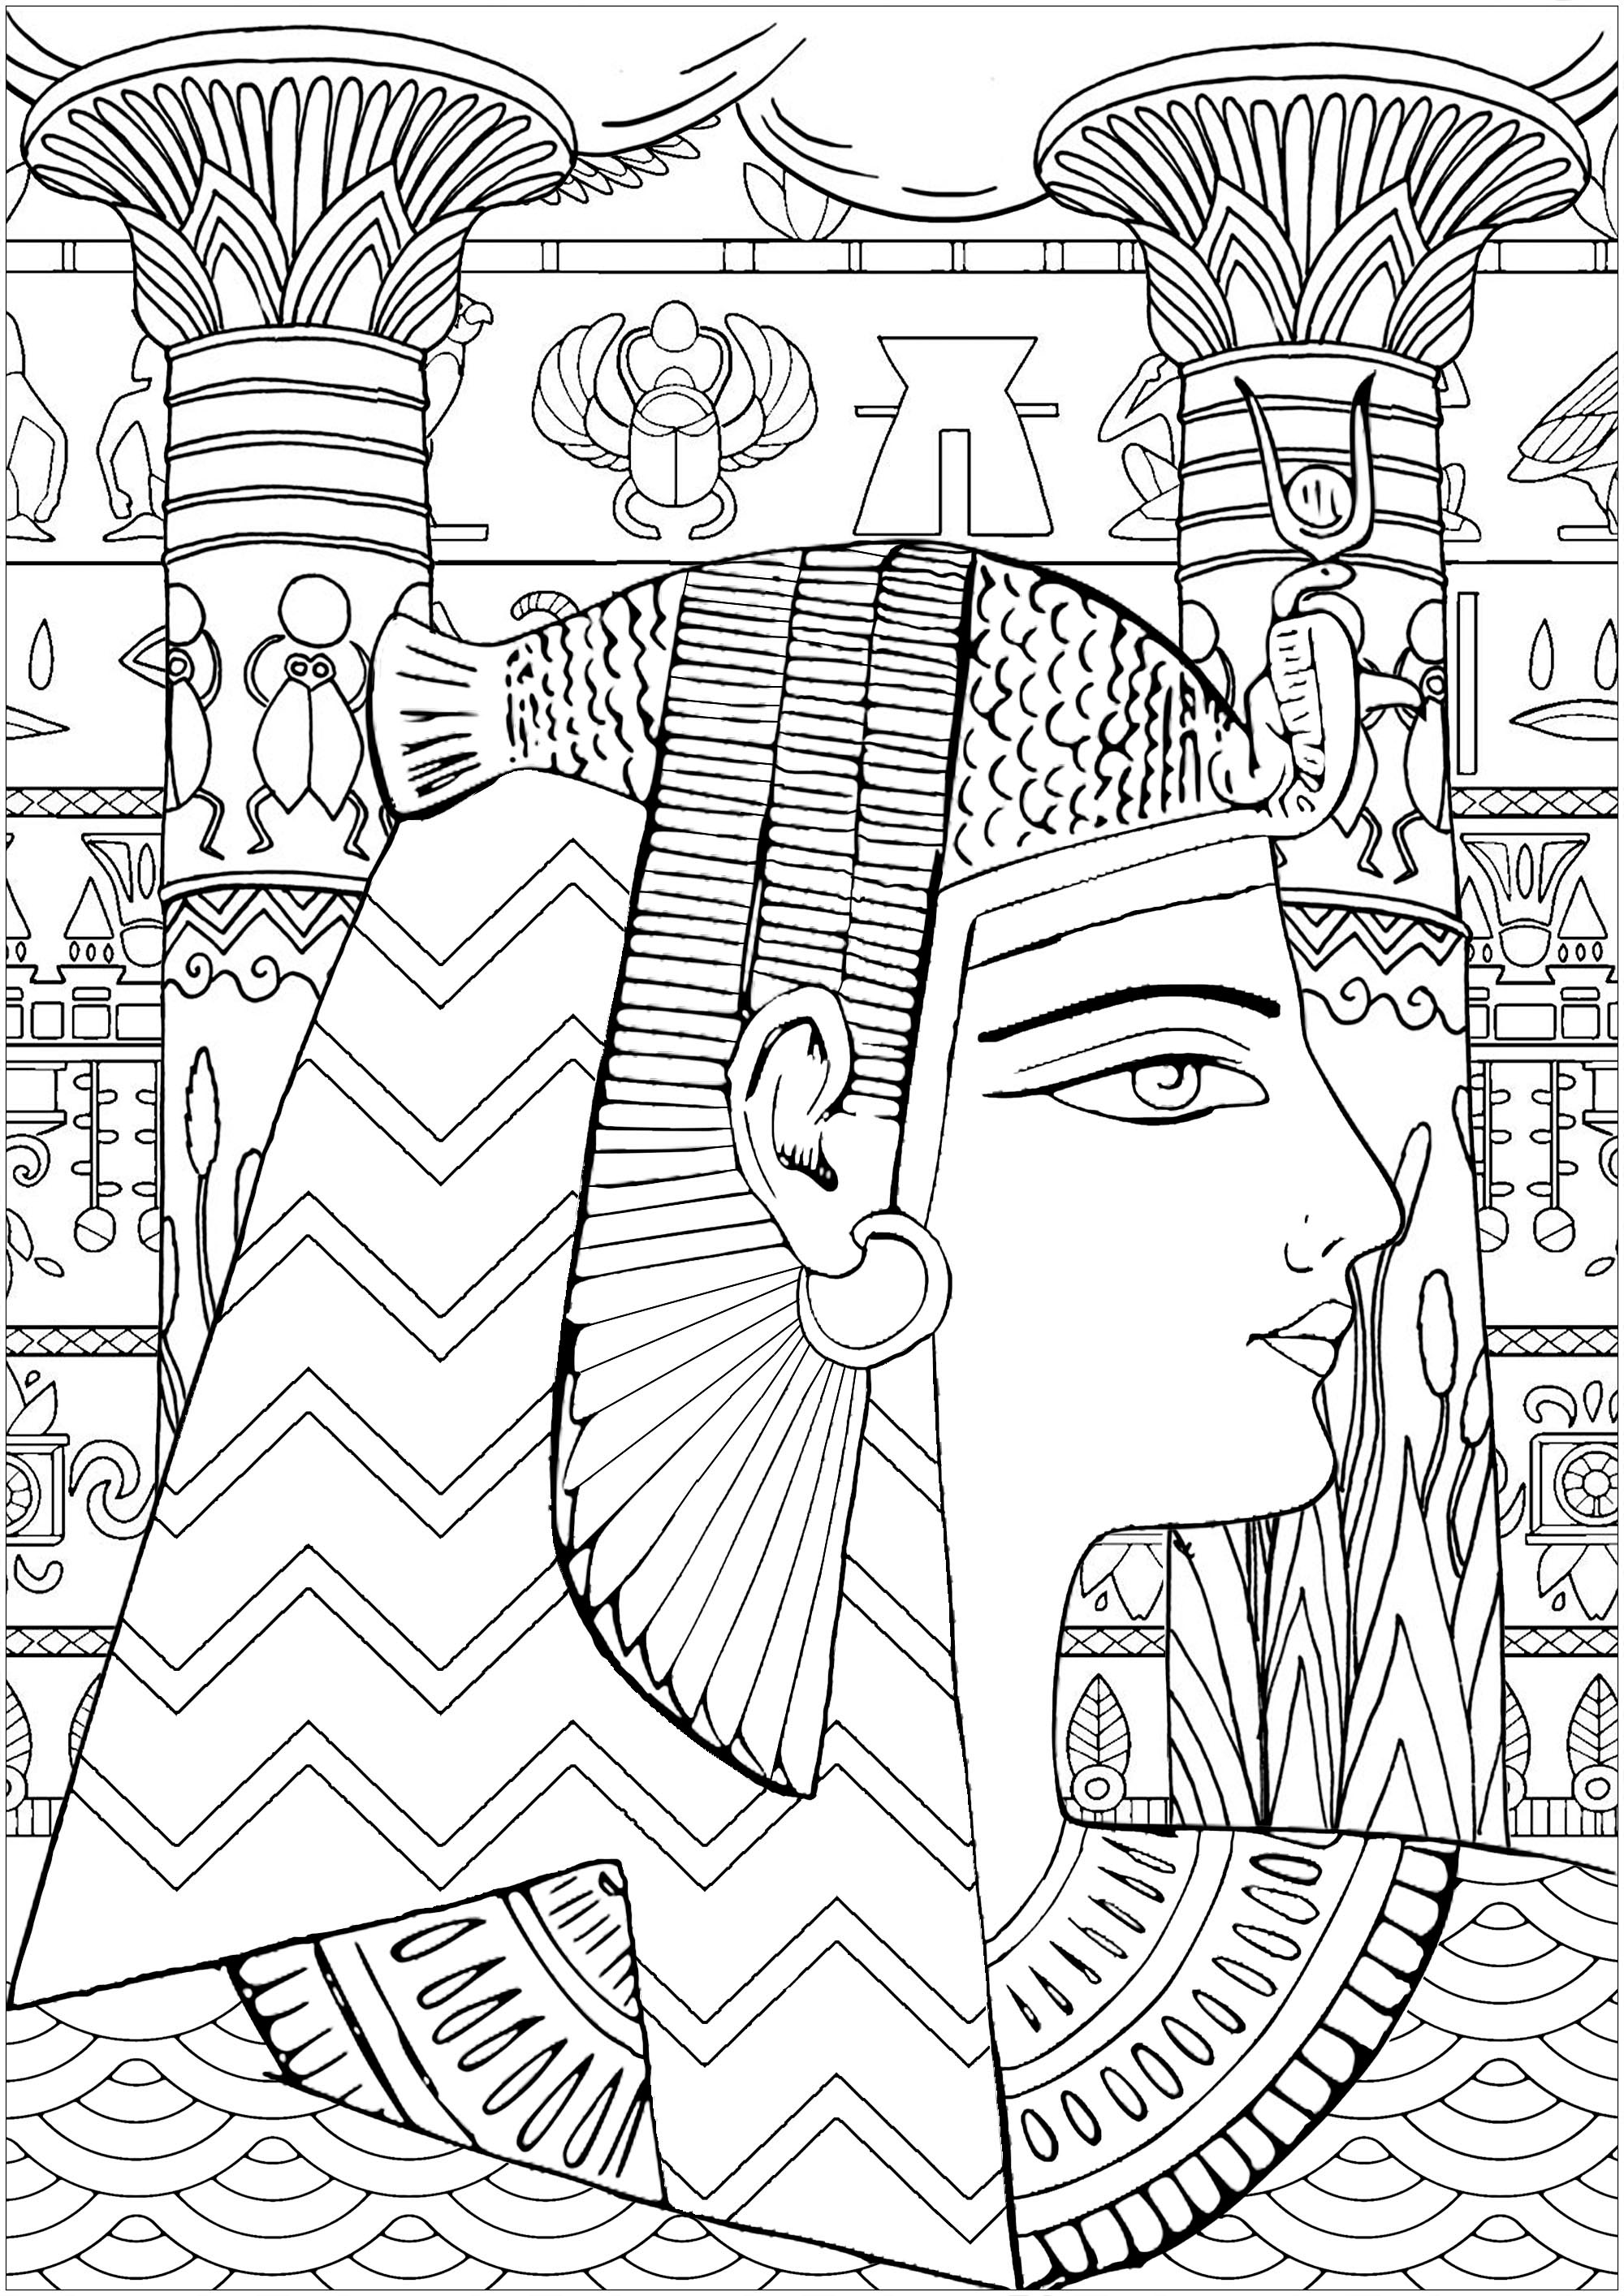 Color this beautiful Queen of Egypt with typical patterns, temple pillars and hieroglyphs in background - Difficult version, Artist : Art. Isabelle